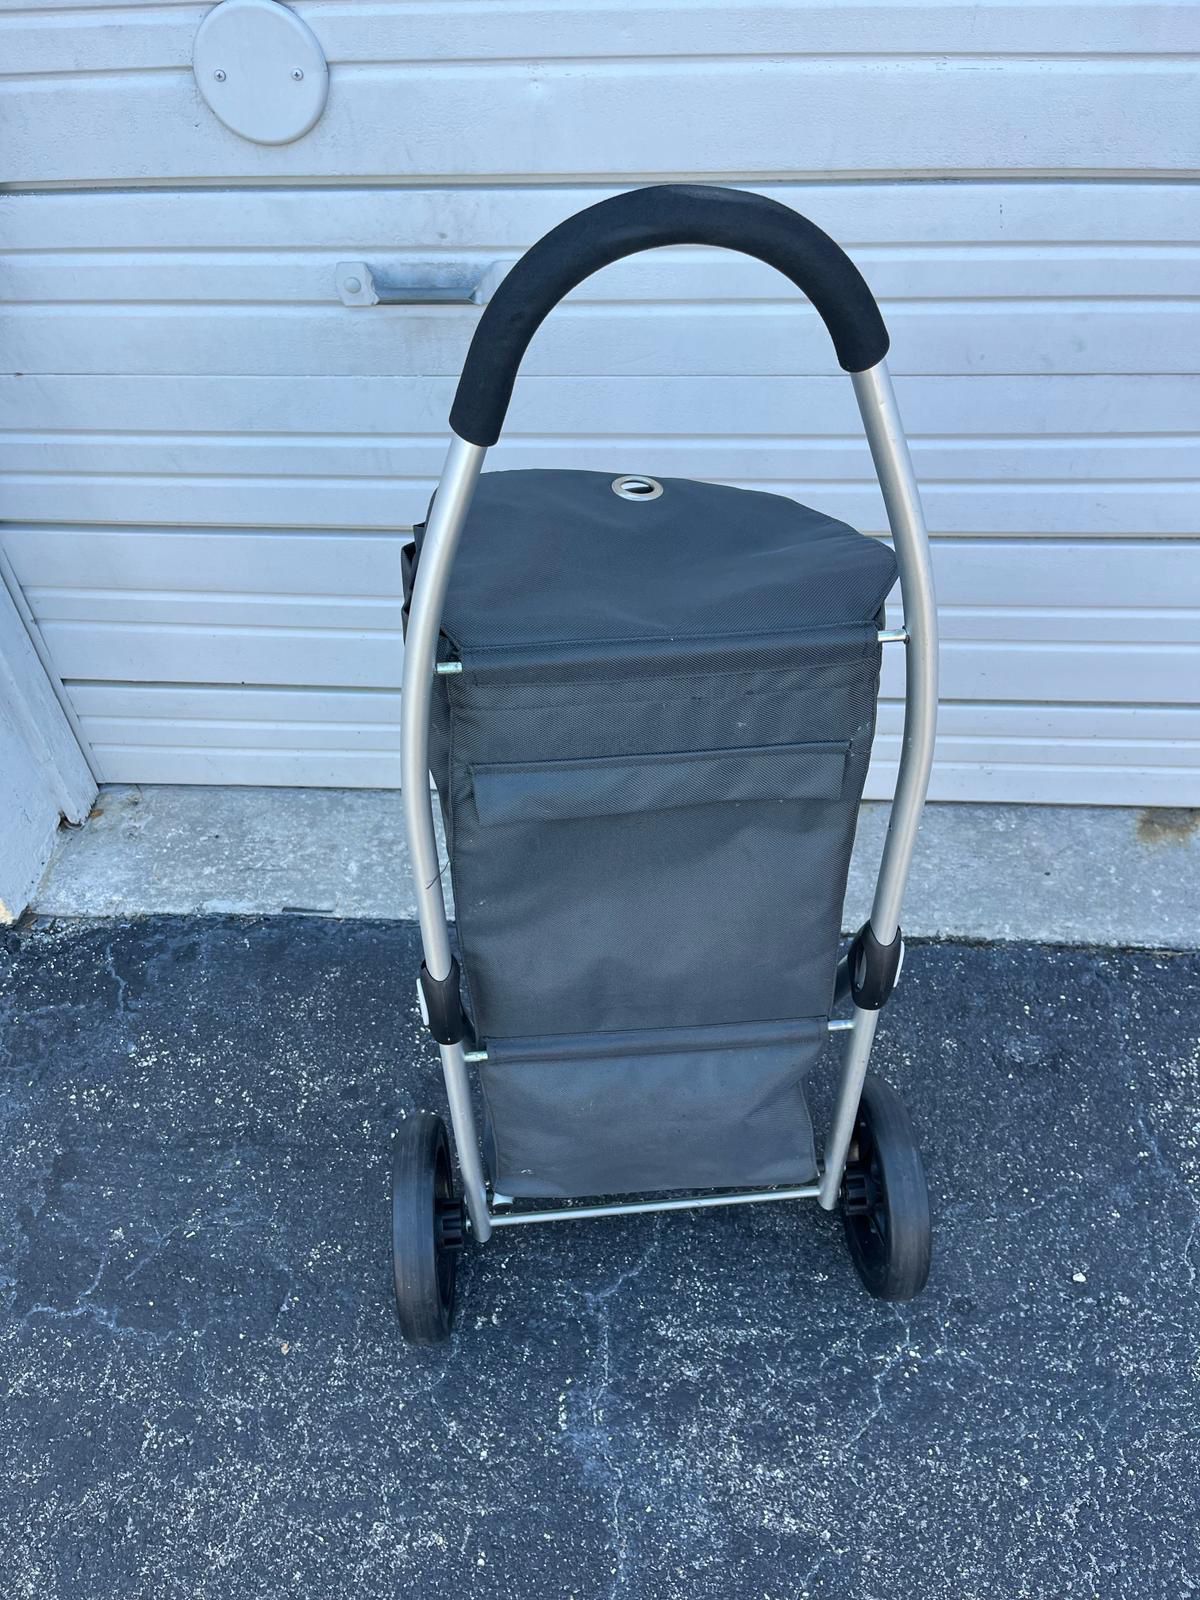 Foldable, waterproof canvas material Gotwo 40 inches high- shopping/ utility cart. $40.